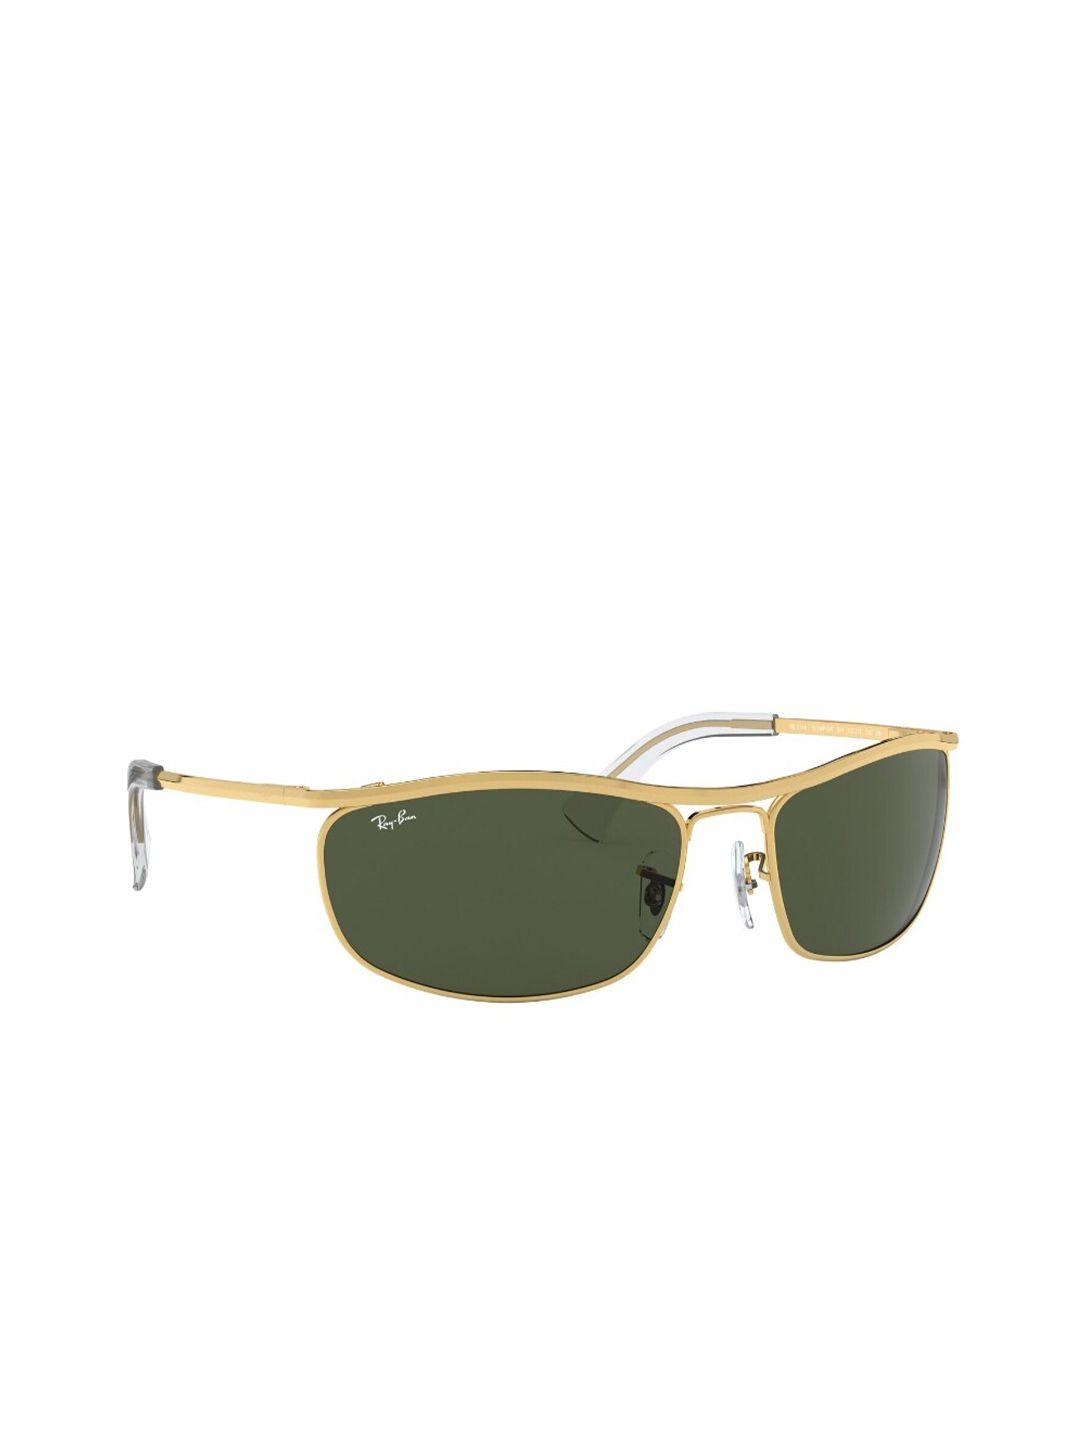 ray-ban full rim rectangle sunglasses with uv protected lens